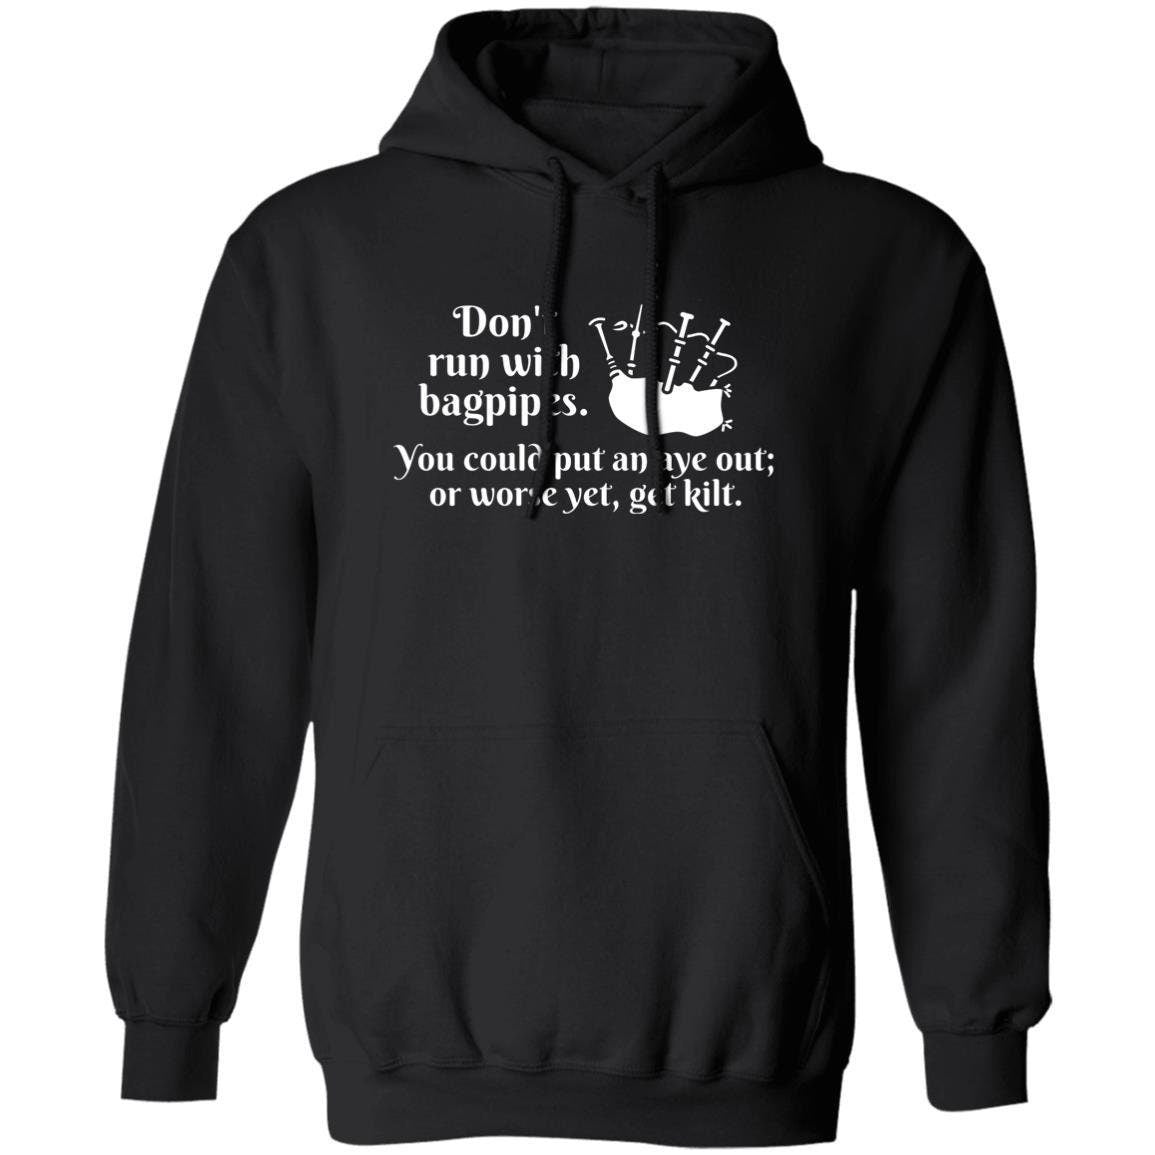 Don't run with bagpipes. Hoodie